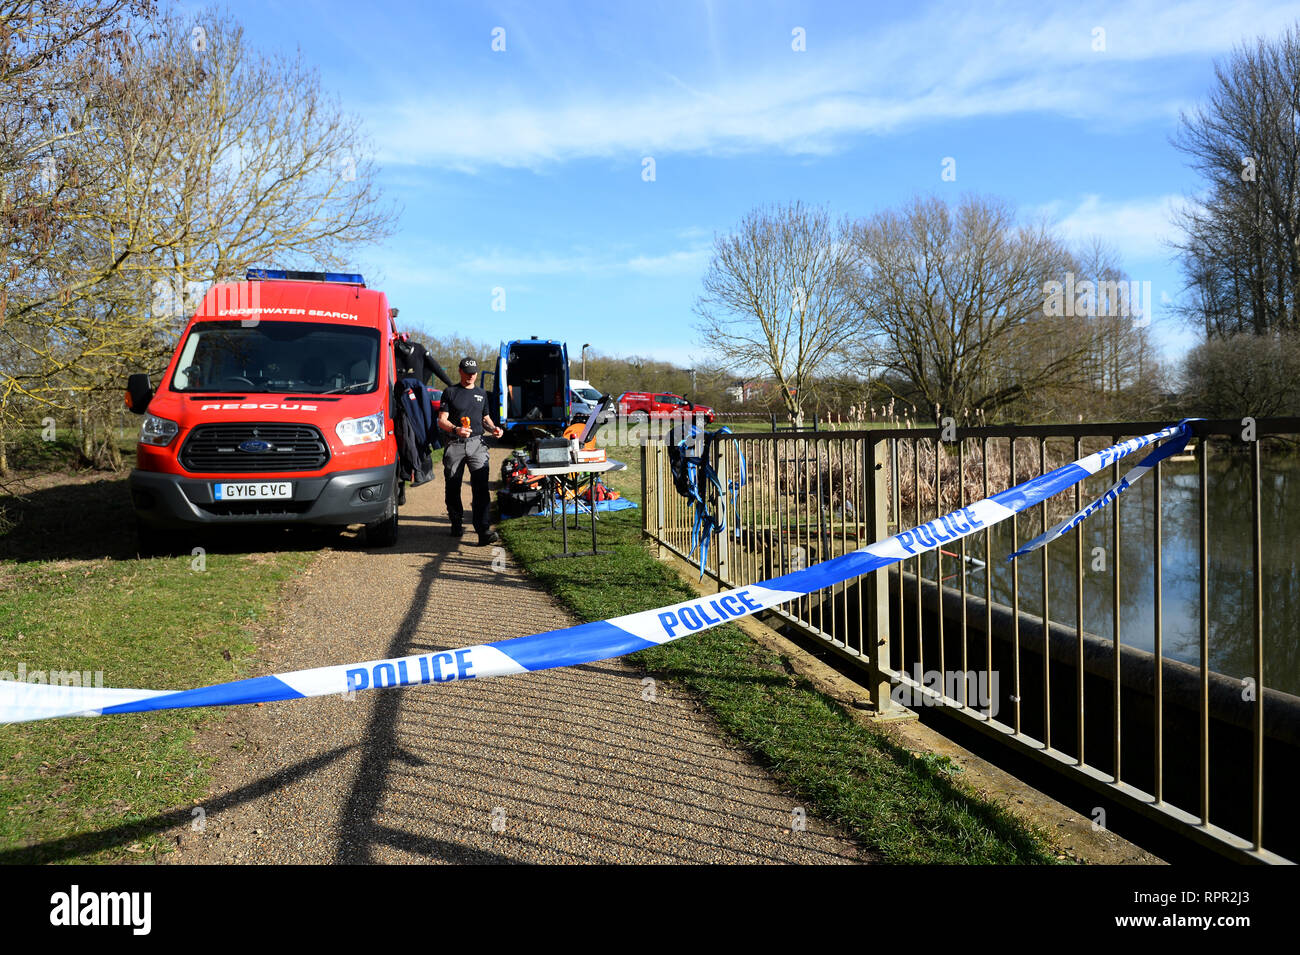 An underwater search rescue vehicle and diving equipment next to one of the four Teardrop Lakes near Knowlhill, Milton Keynes, searching for missing Leah Croucher, 19, who has not been seen since February 14. Stock Photo